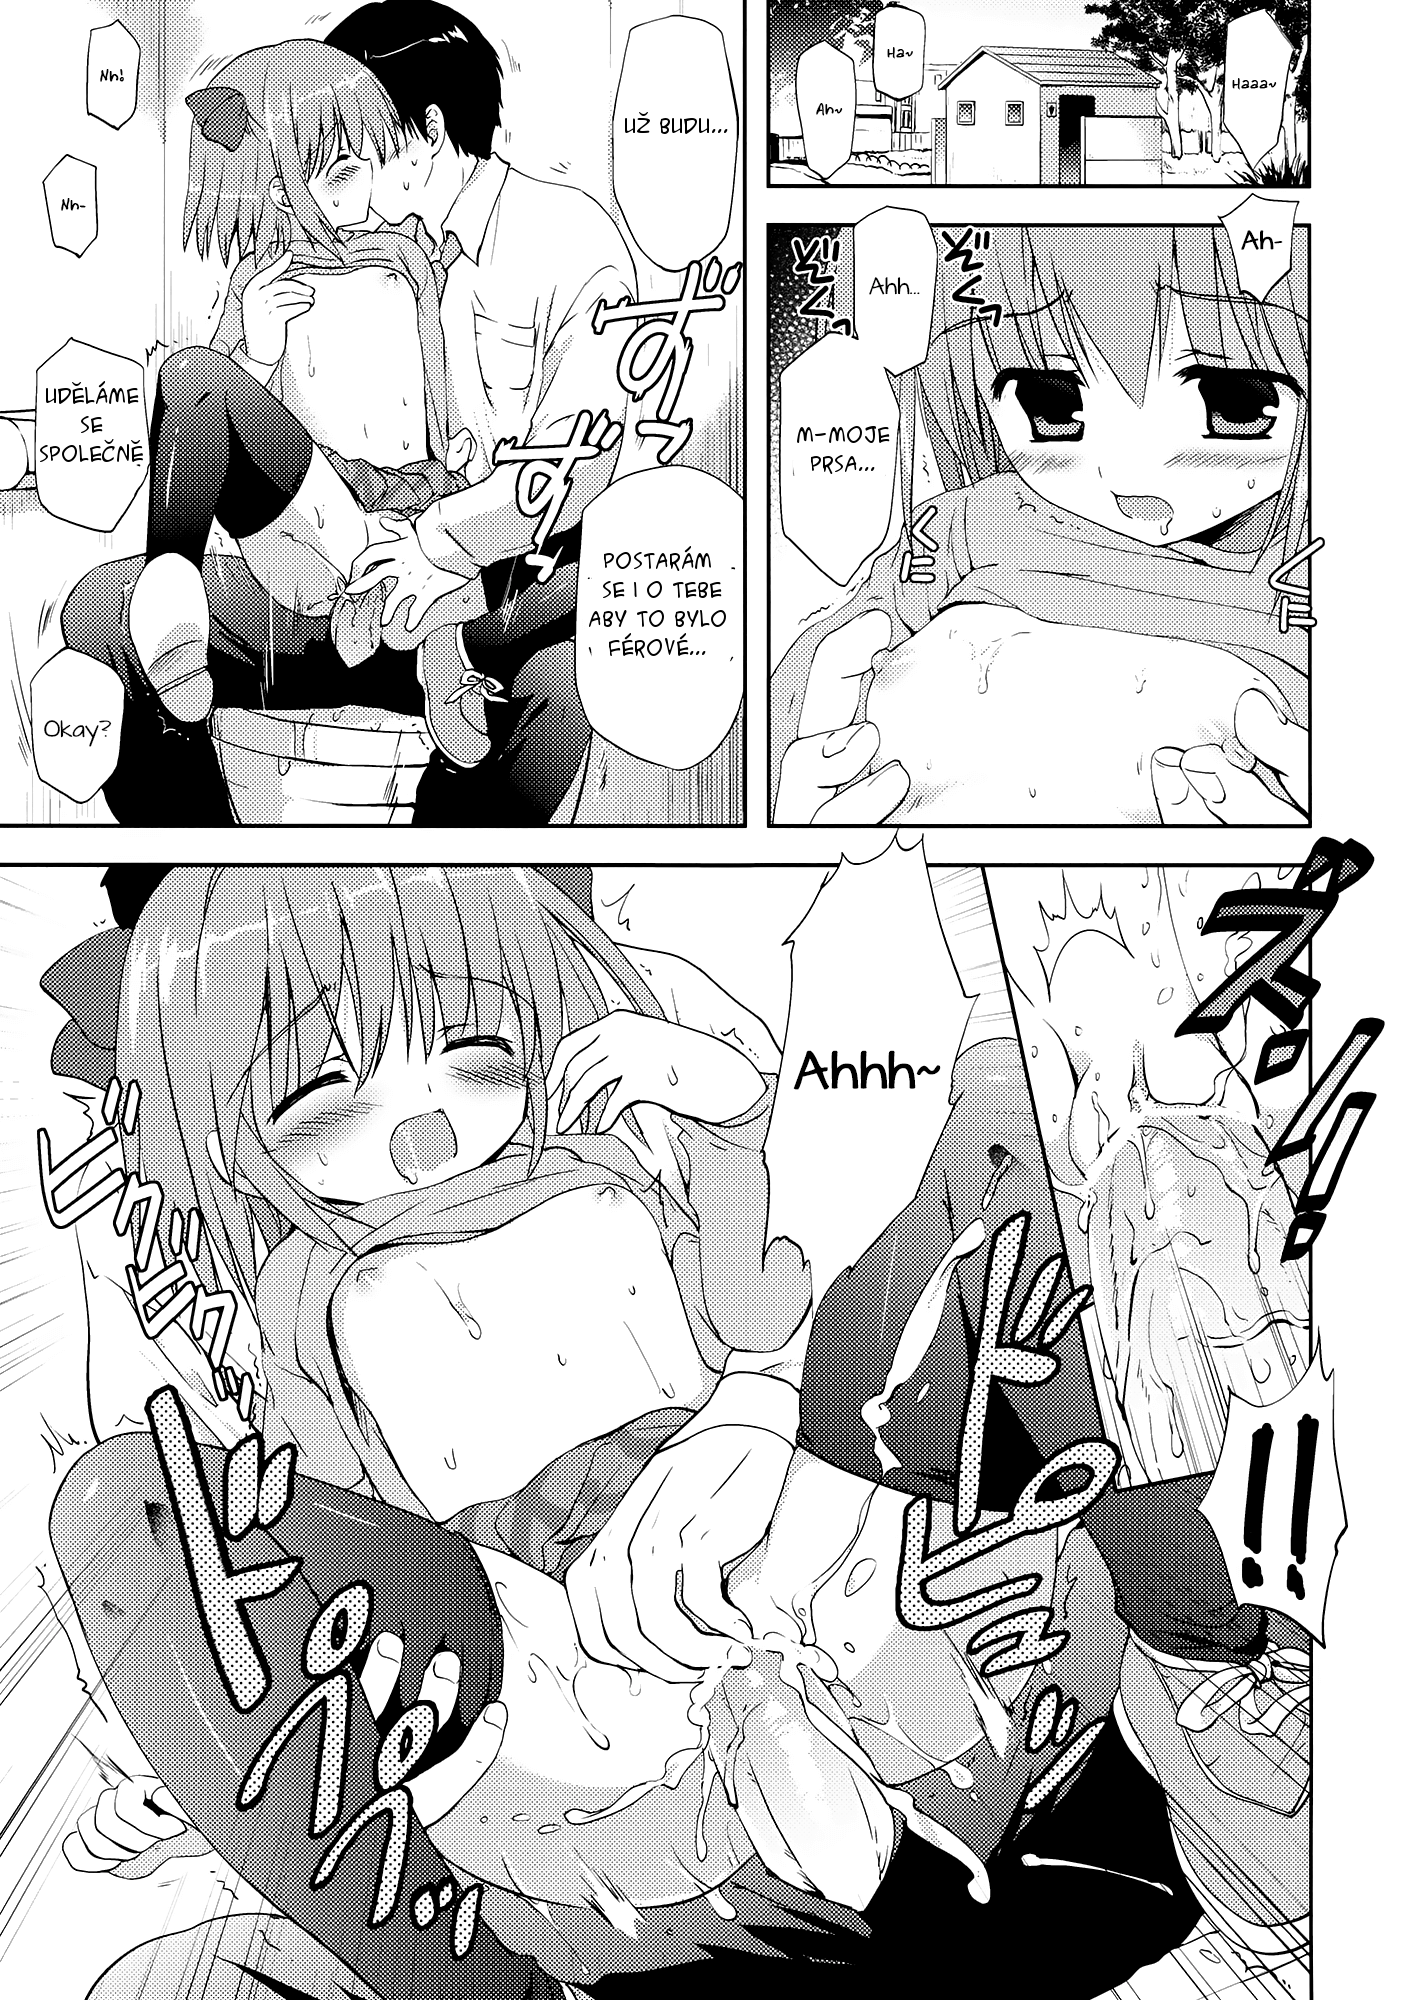 Doki The Story Of How I Did It With An Elementary Schooler For Only 30 Yen Original Page 07